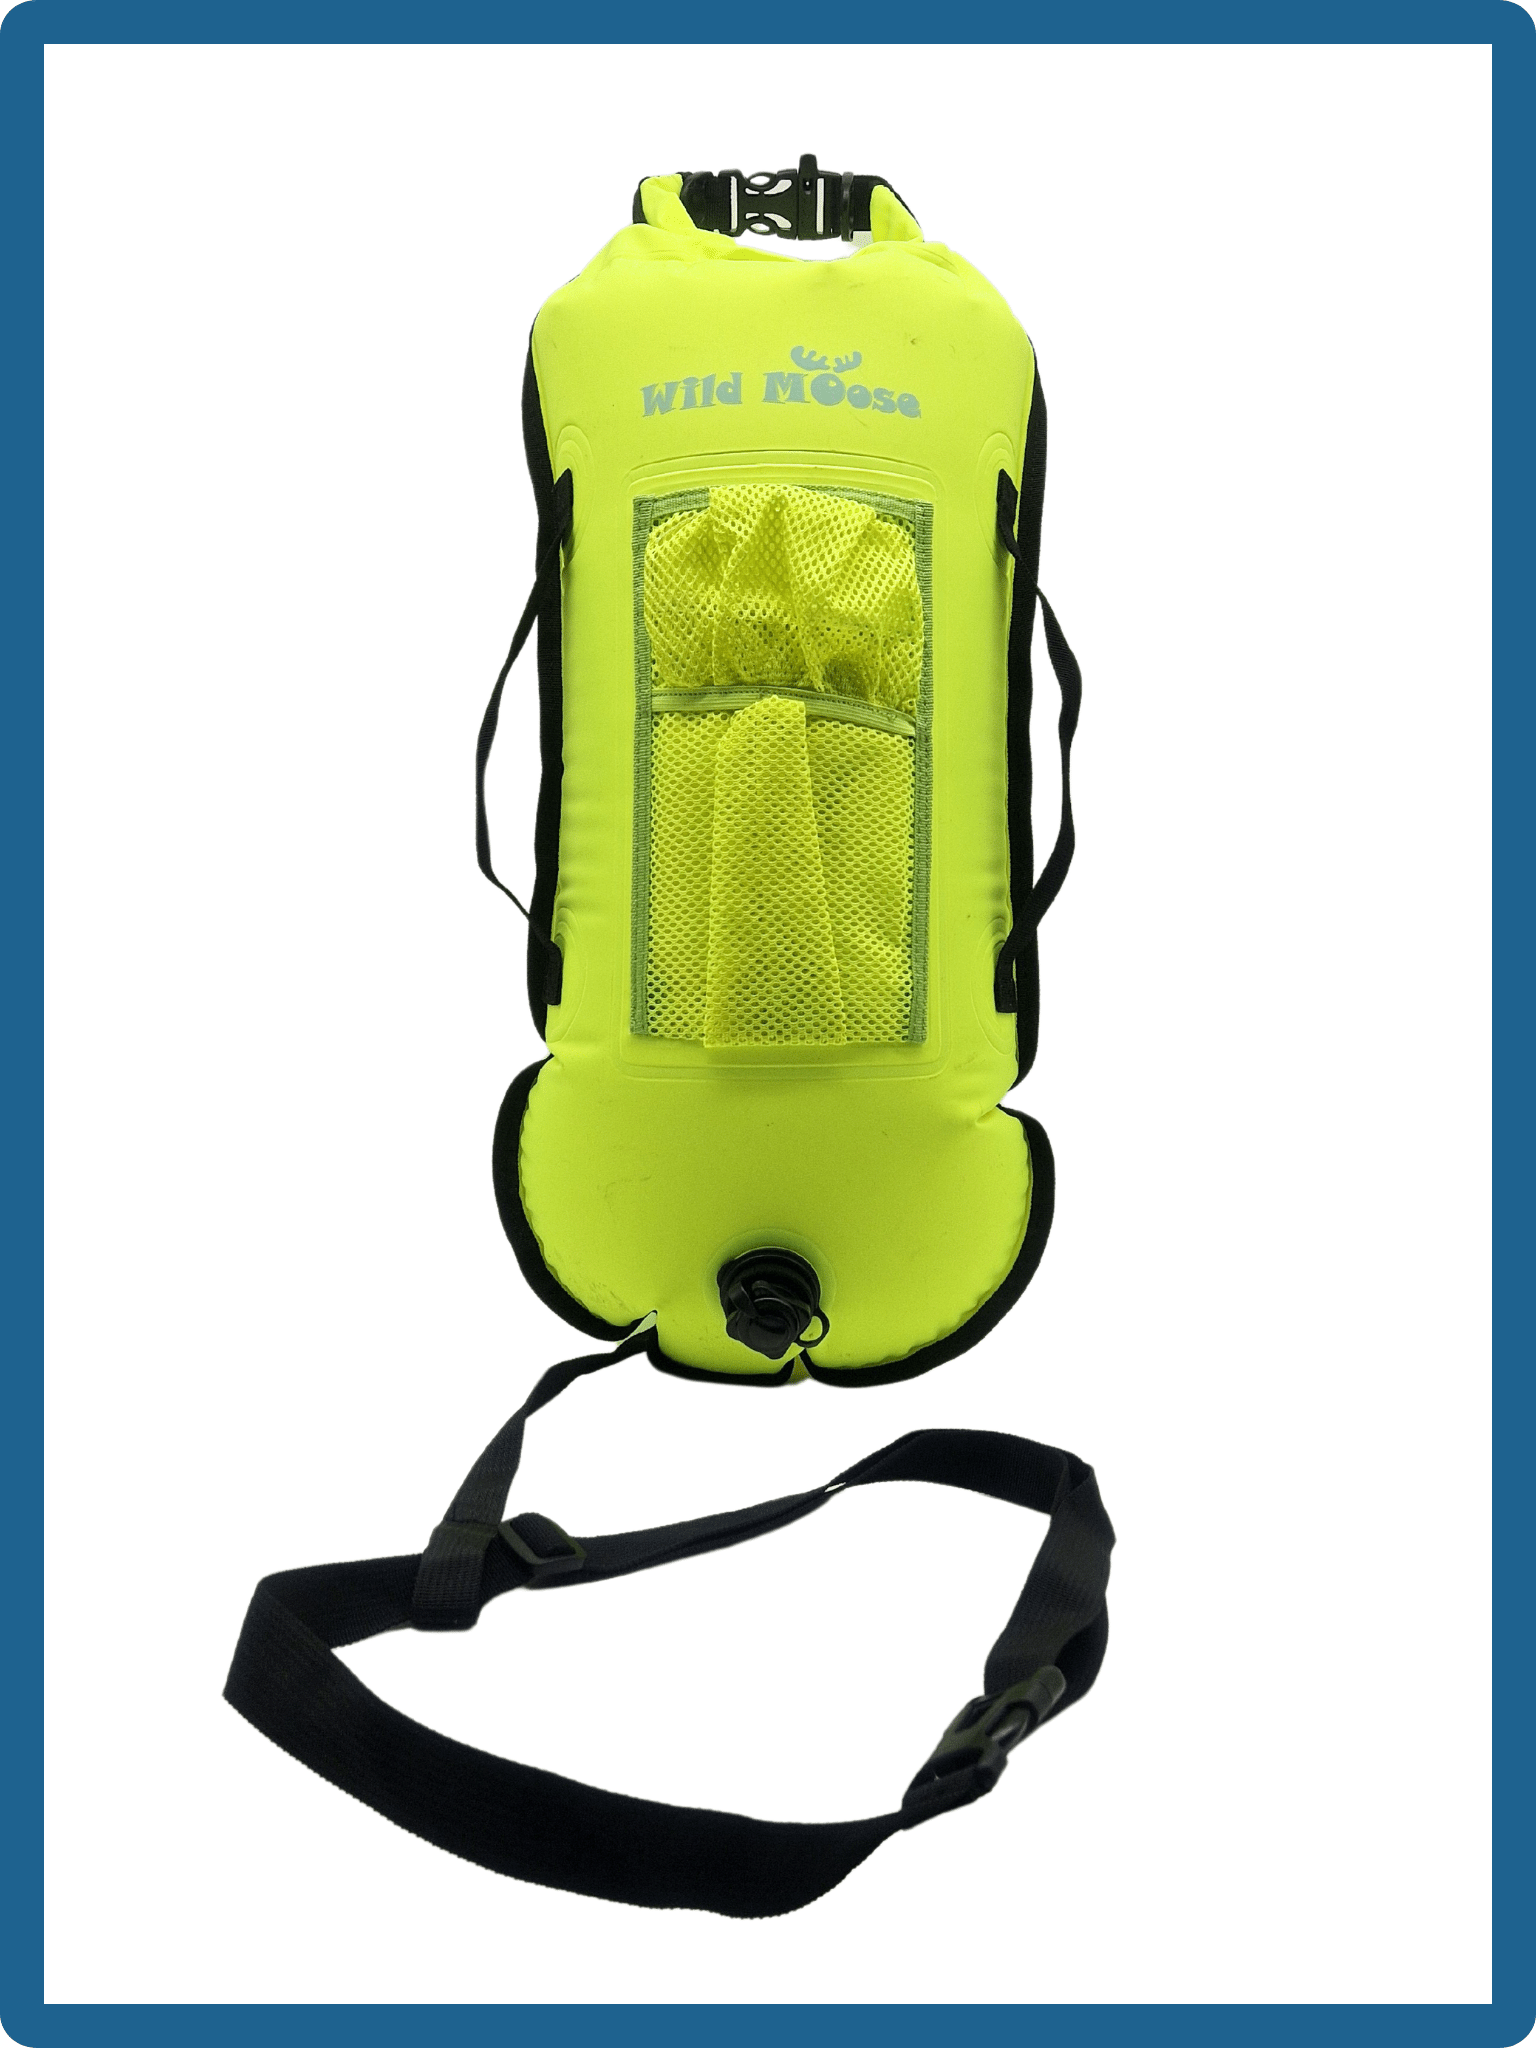 28L neon yellow tow floats with mesh top pocket and black handles and leash